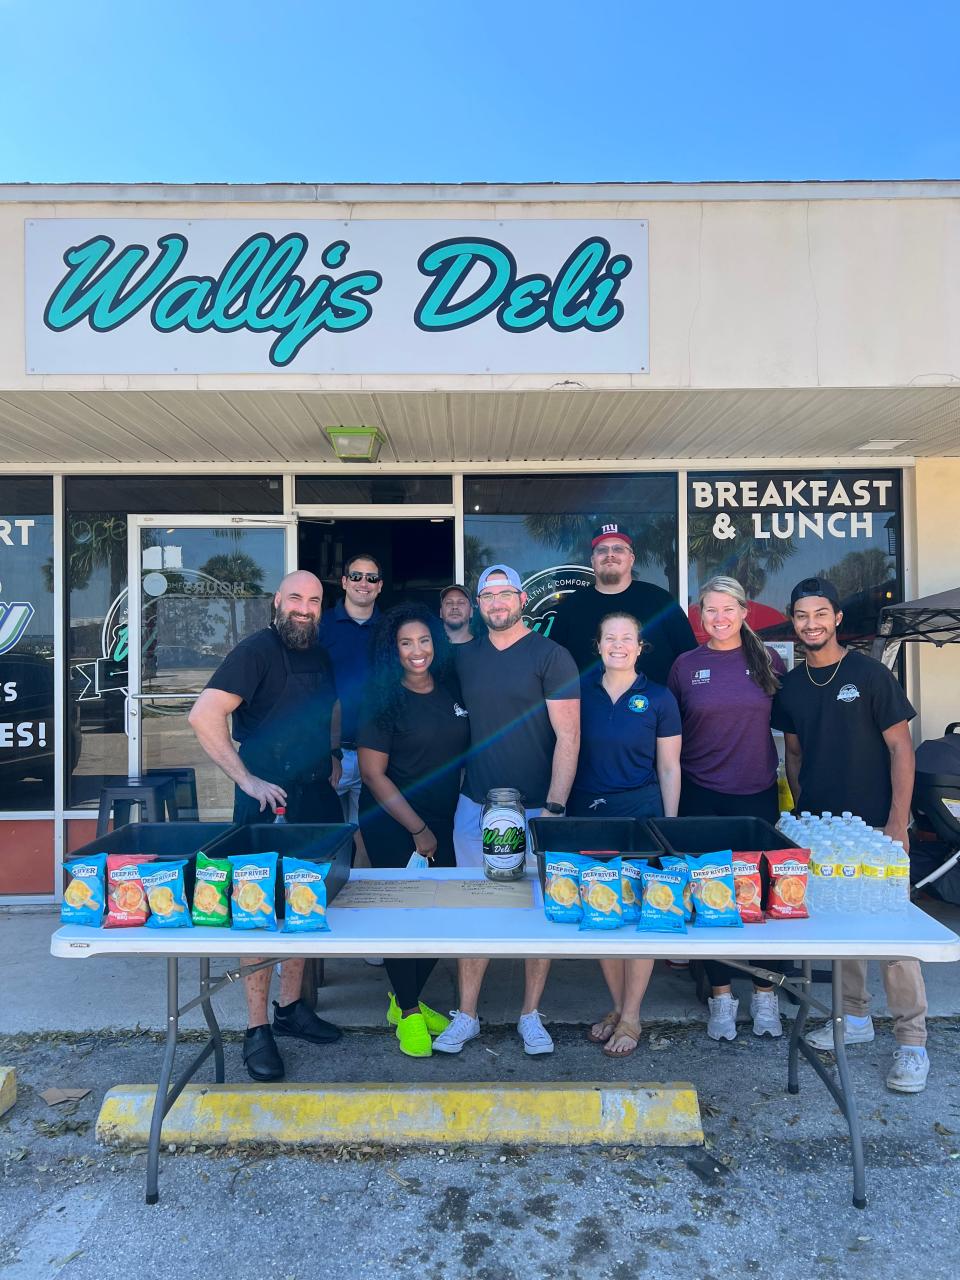 Wally's Deli in San Carlos gave out 400-plus free sandwiches, plus water, ice and more after Hurricane Ian.